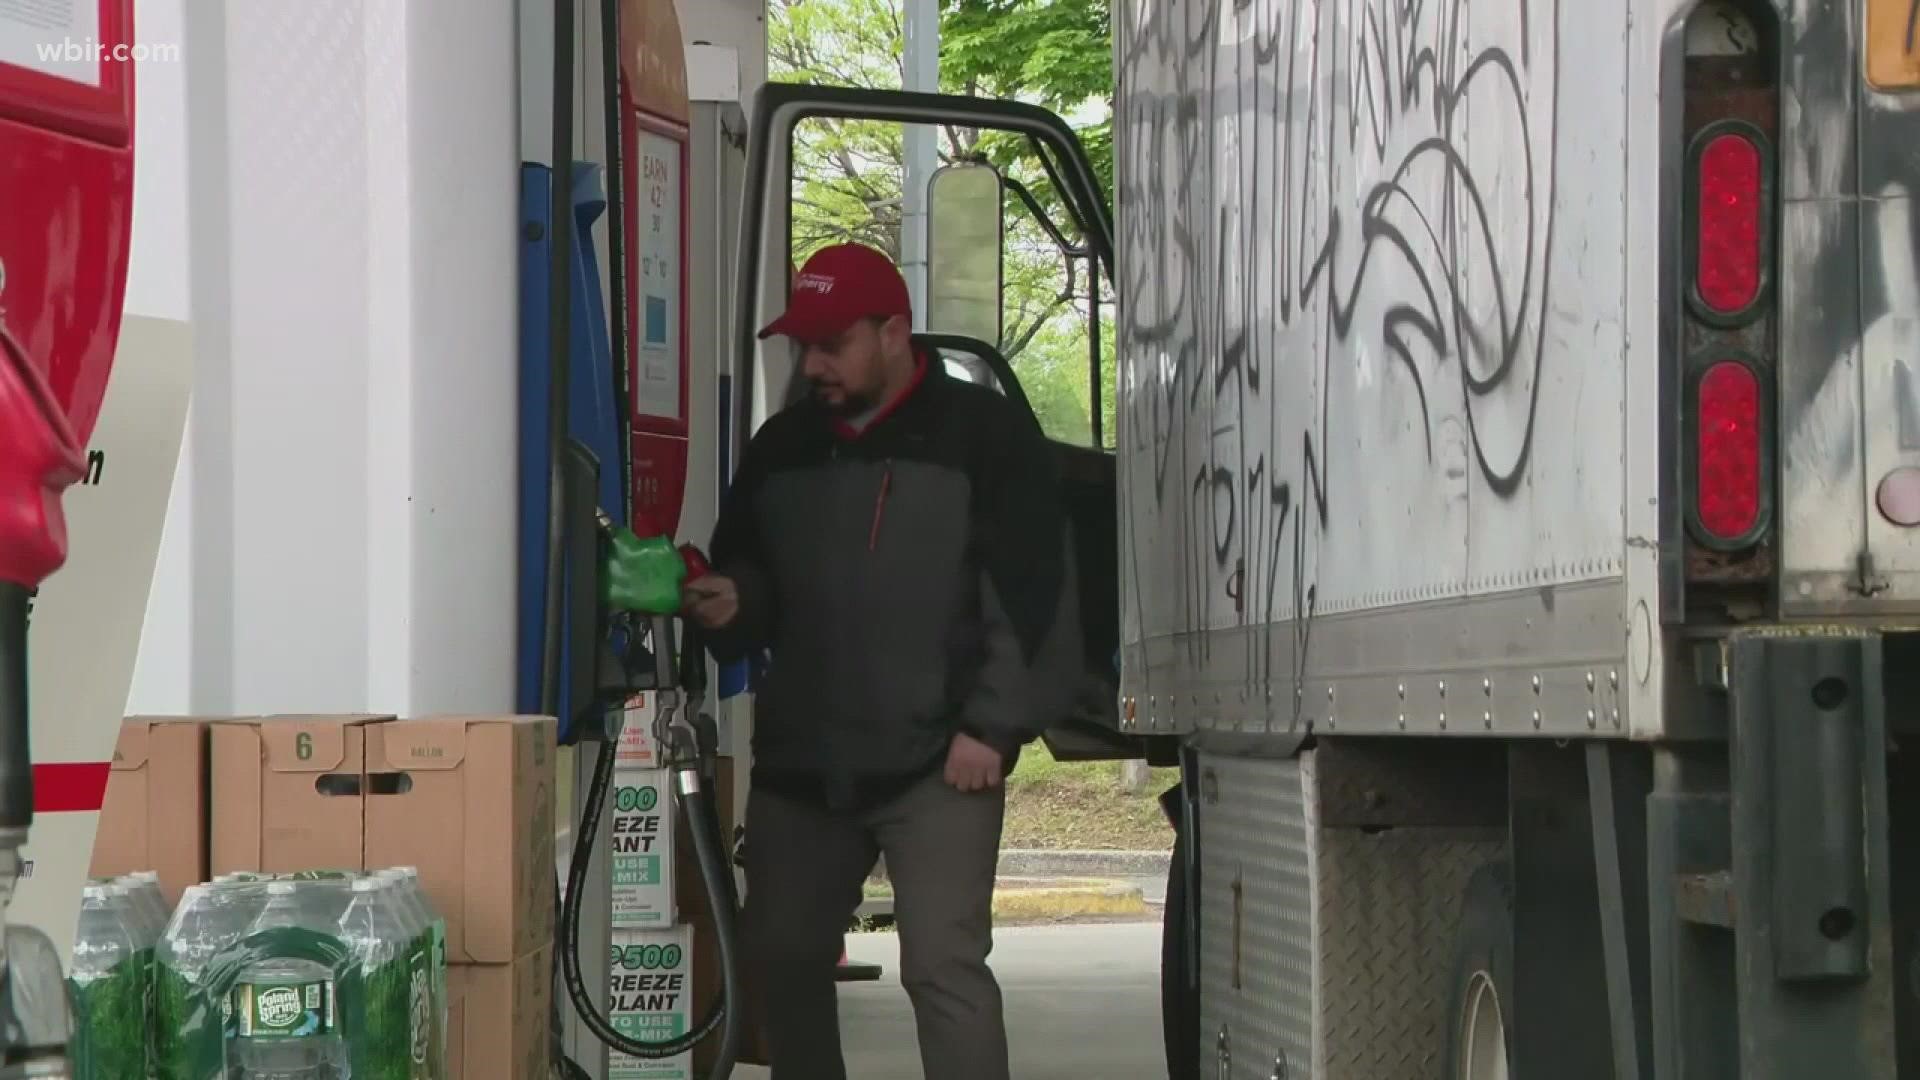 According to AAA, the average cost of a gallon of diesel was $5.34 on Tuesday in Tennessee and trucking companies said they are feeling the heat.